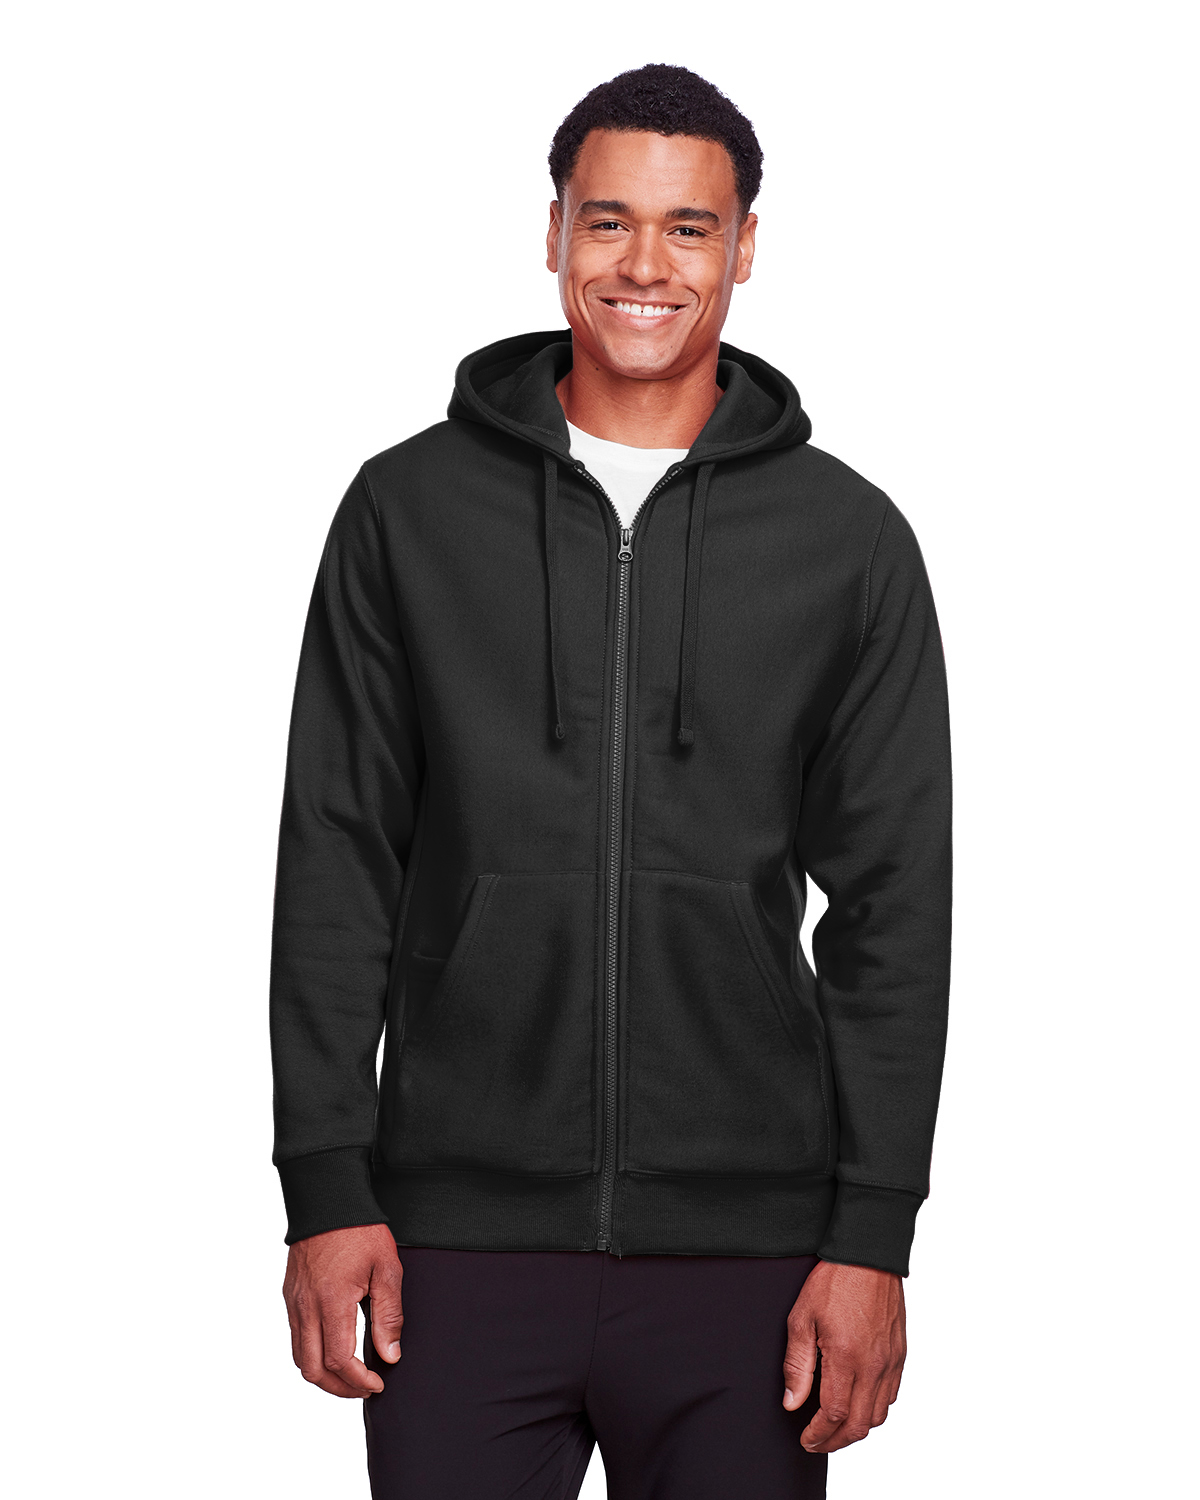 Team 365 Adult Zone HydroSport™ Heavyweight Pullover Hooded